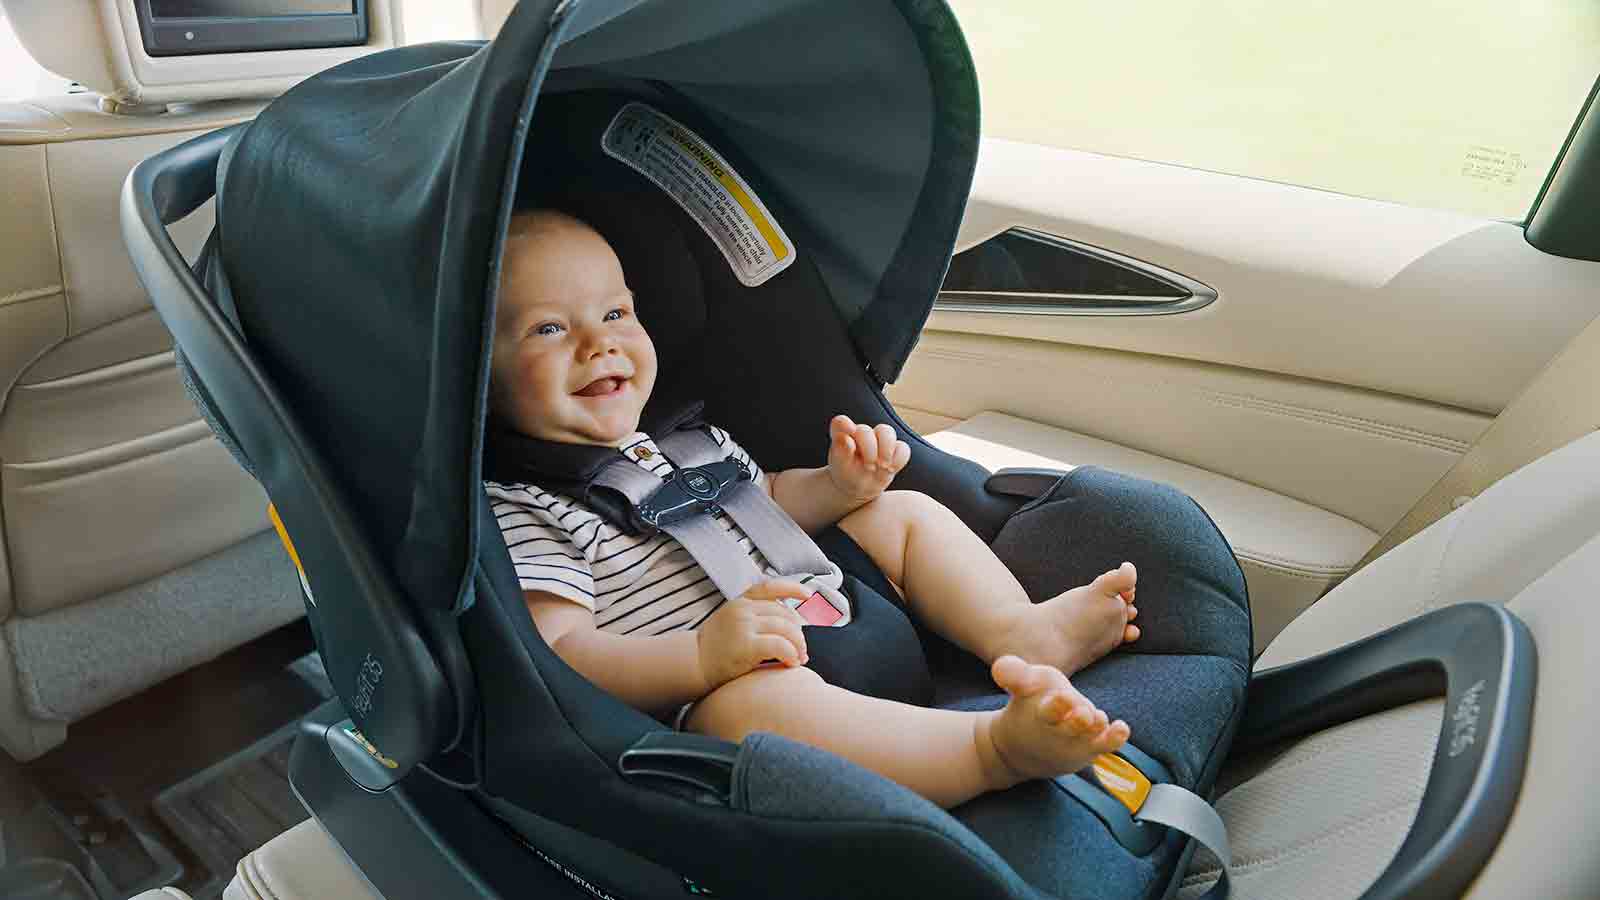 All About the Best Baby Car Seats